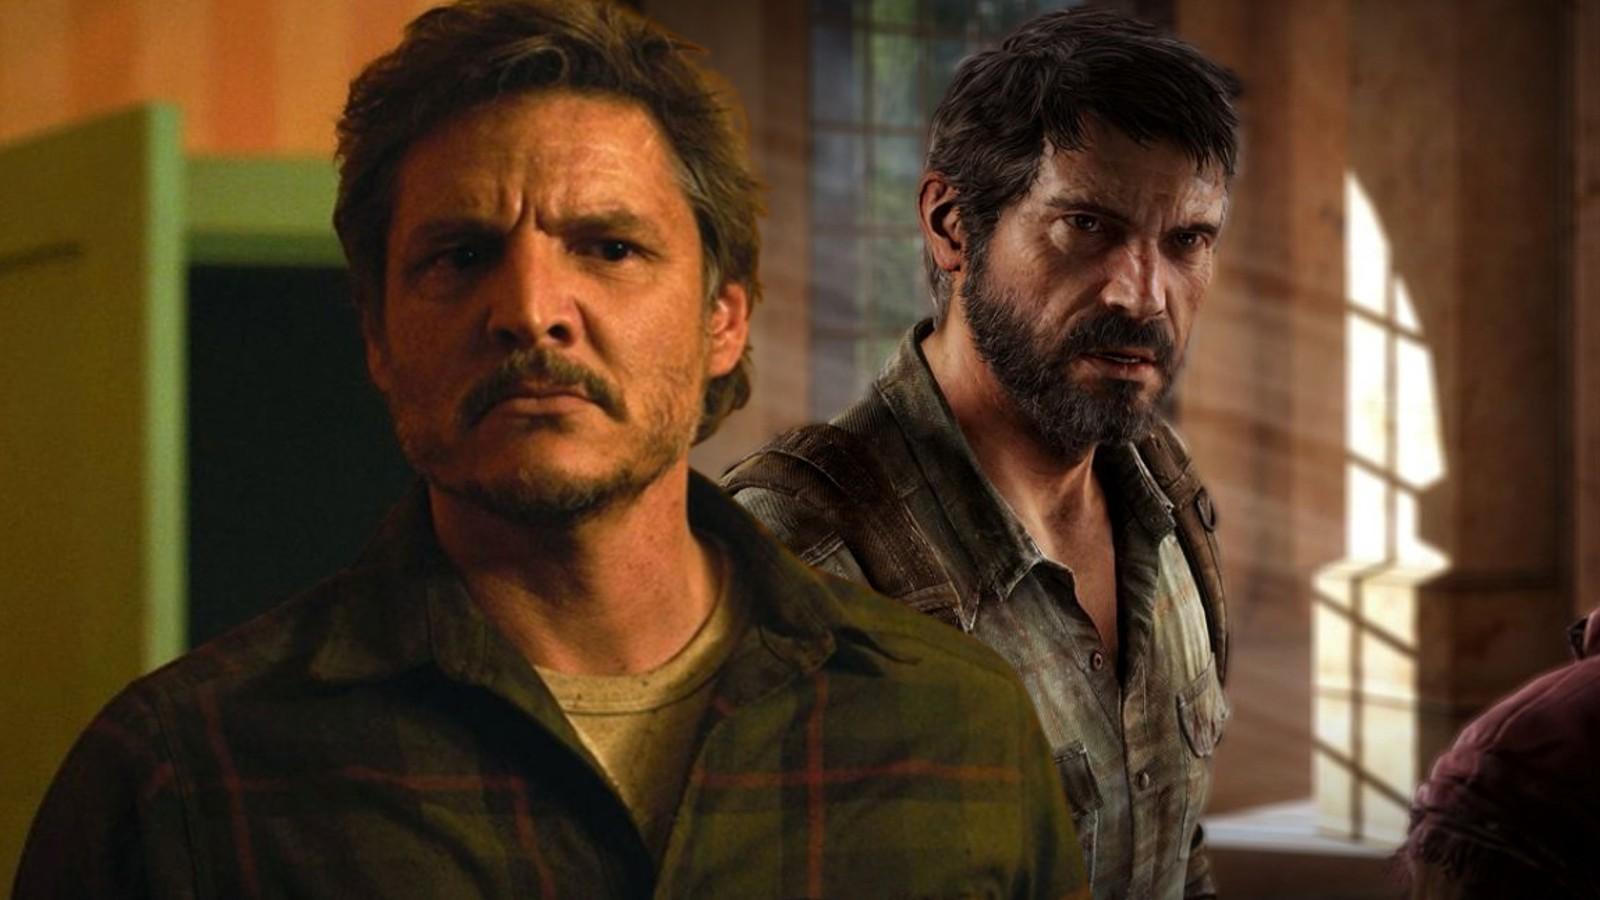 The Last Of Us Episode 8 Finally Introduces The Games' Joel Actor - IMDb